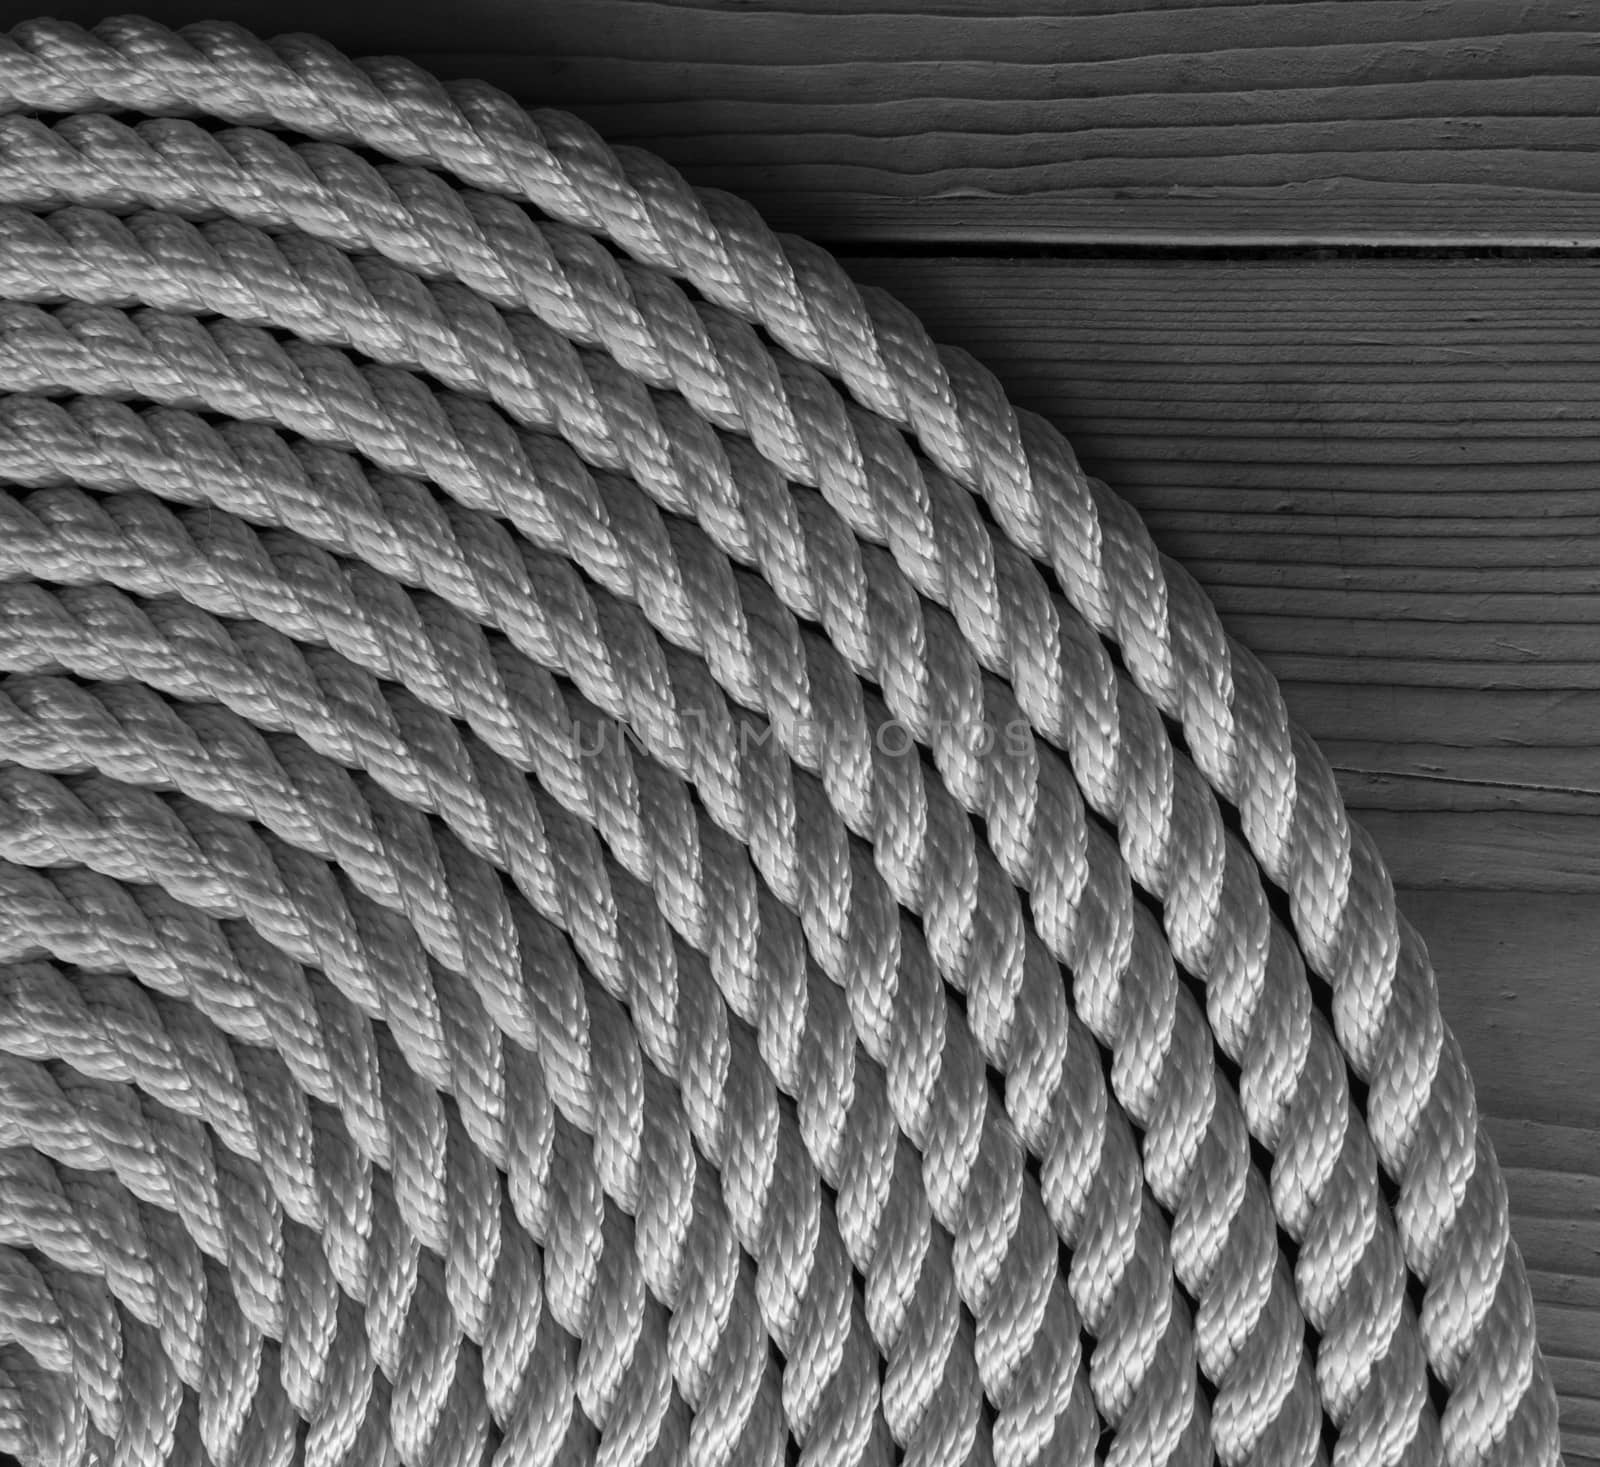 Rope Coil black and white